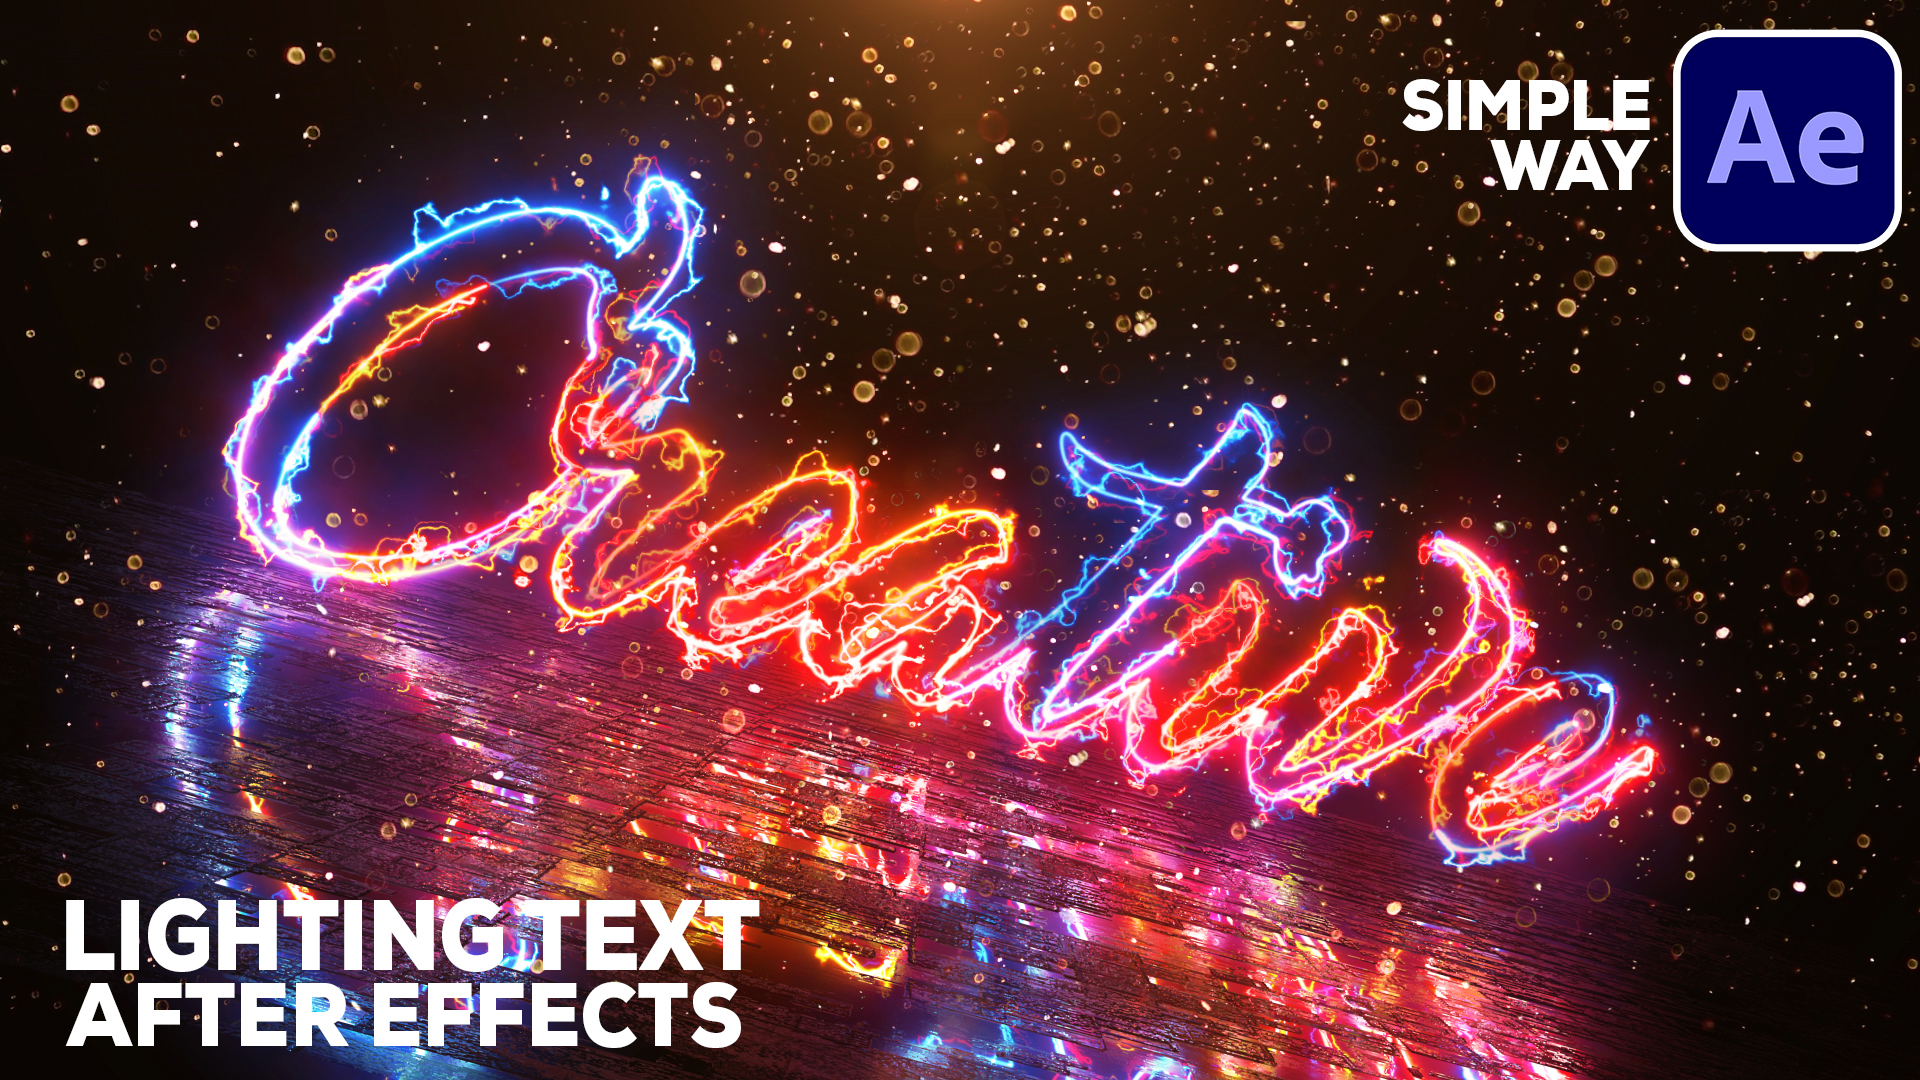 After Effects Electric Light Text Animation with AMAZING Reflection